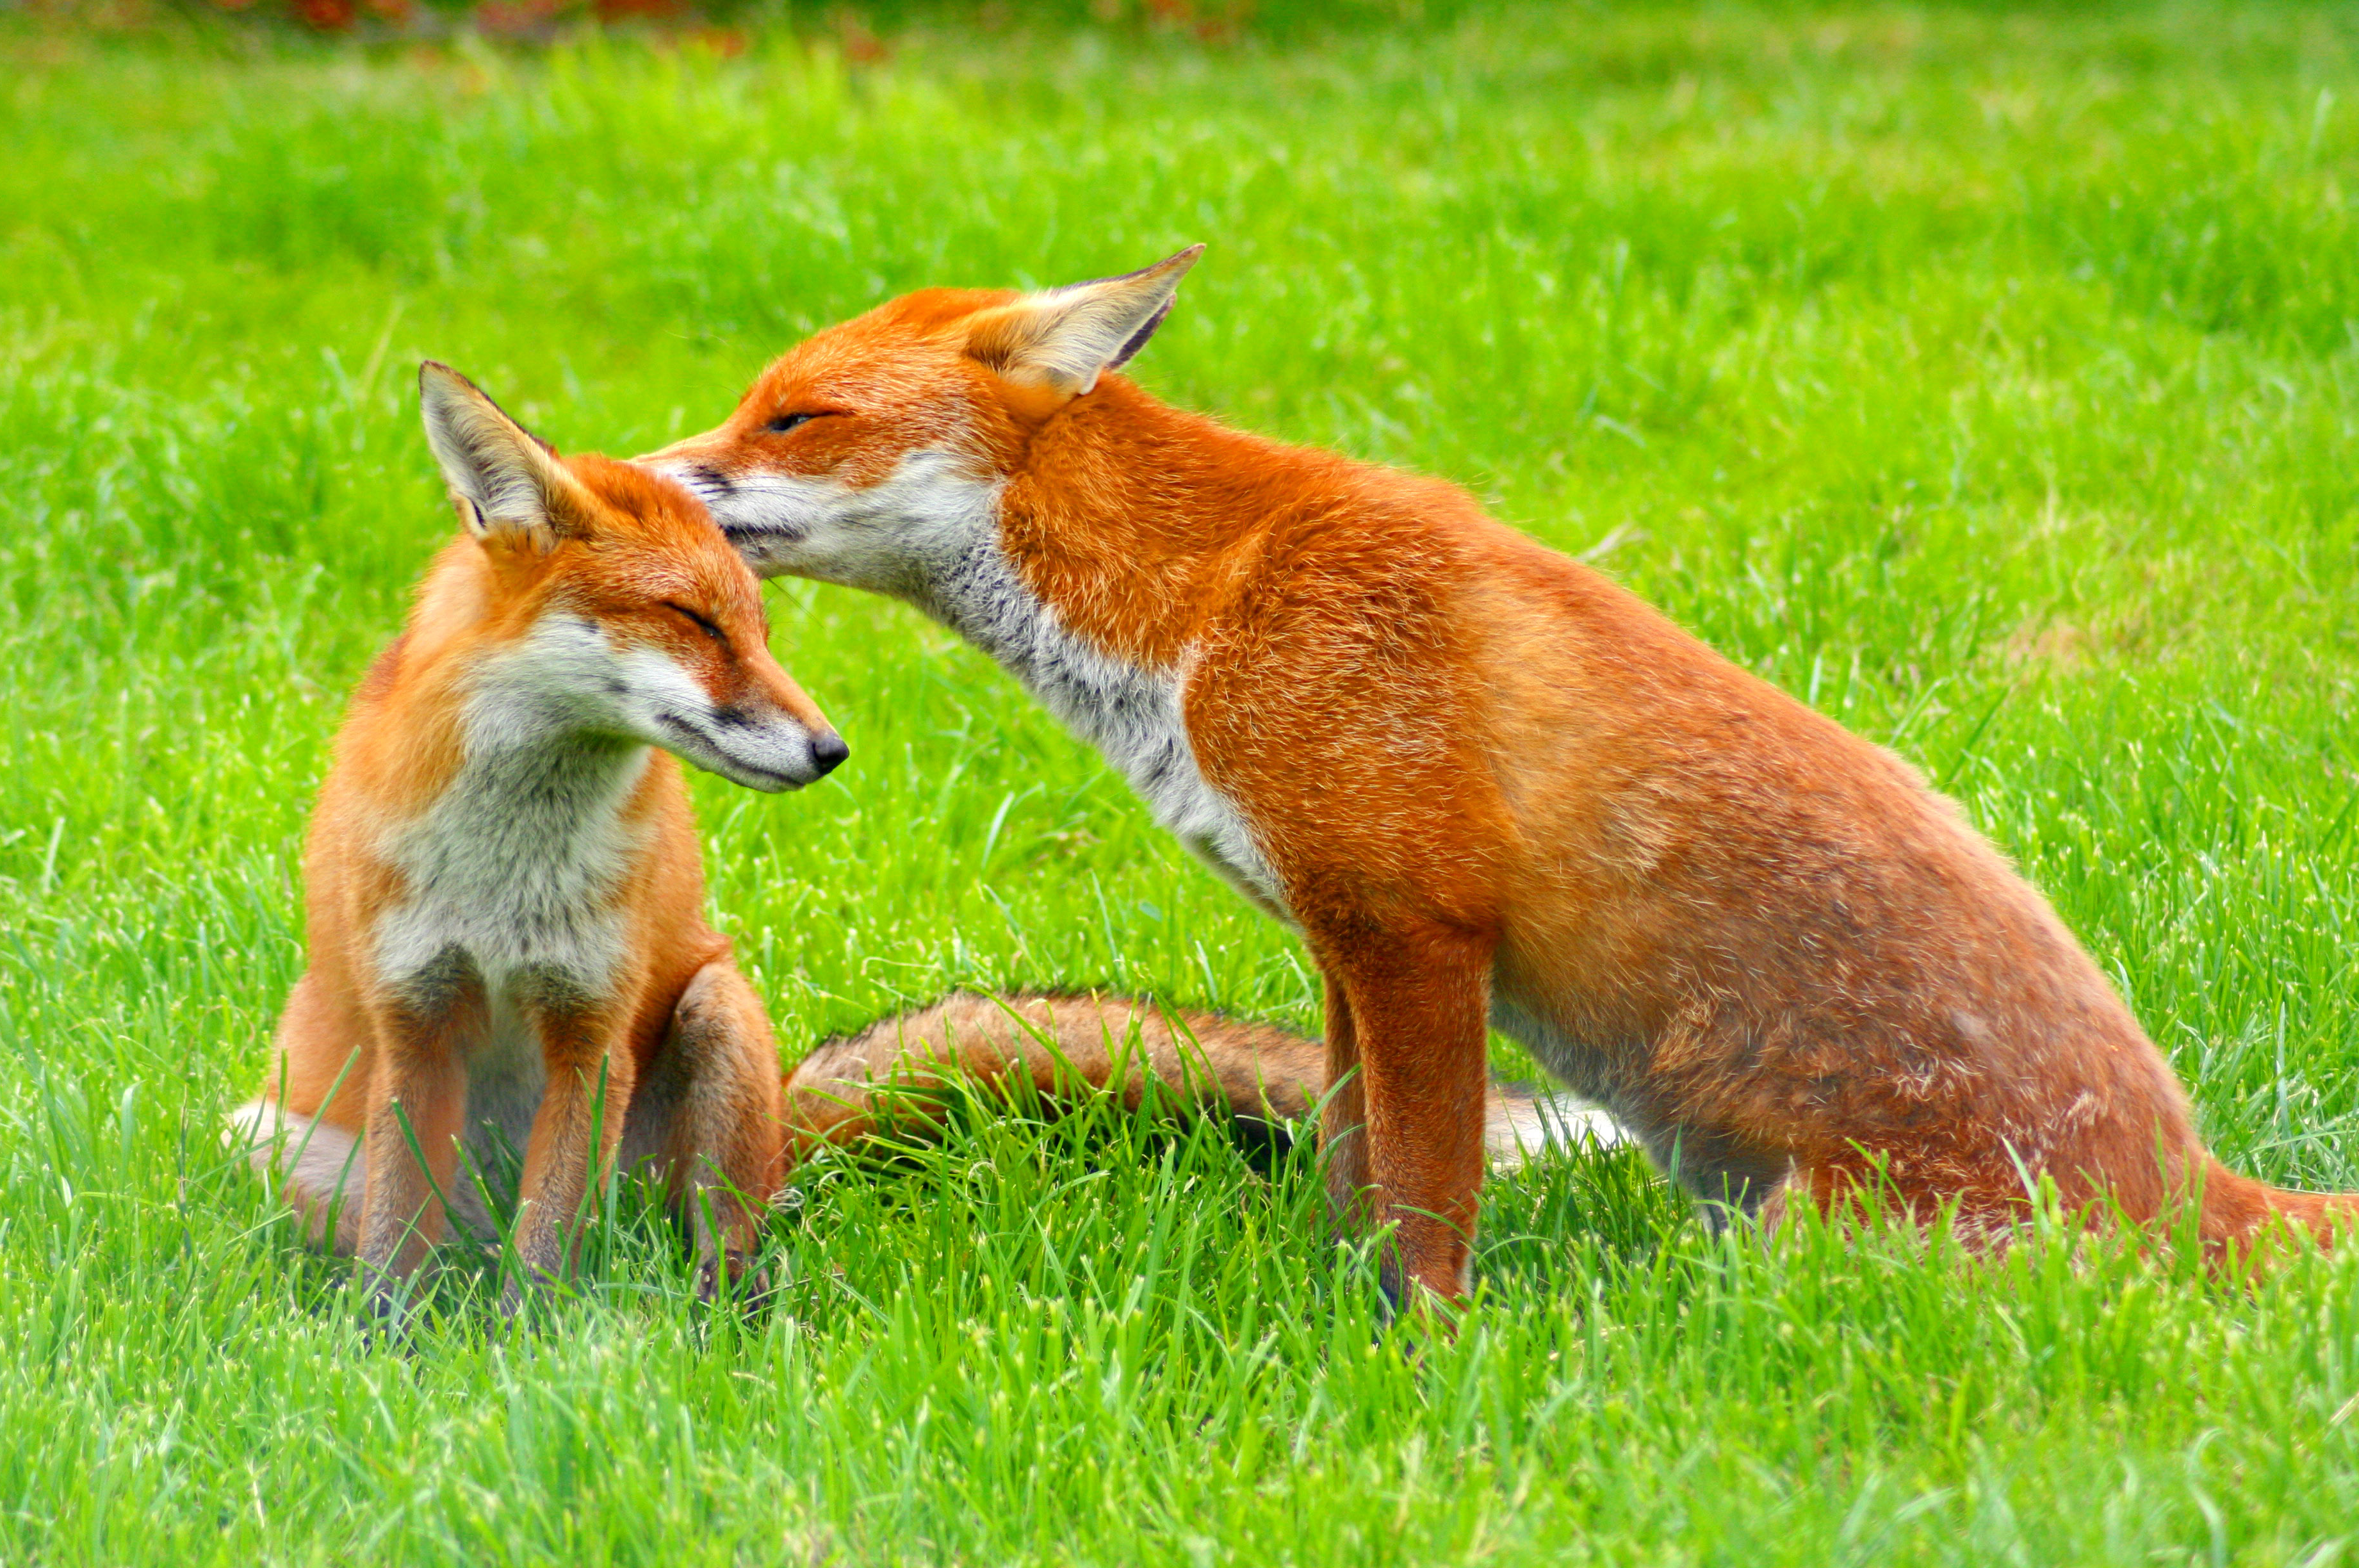 Red Fox Interaction with Humans - The Fox As An Ally